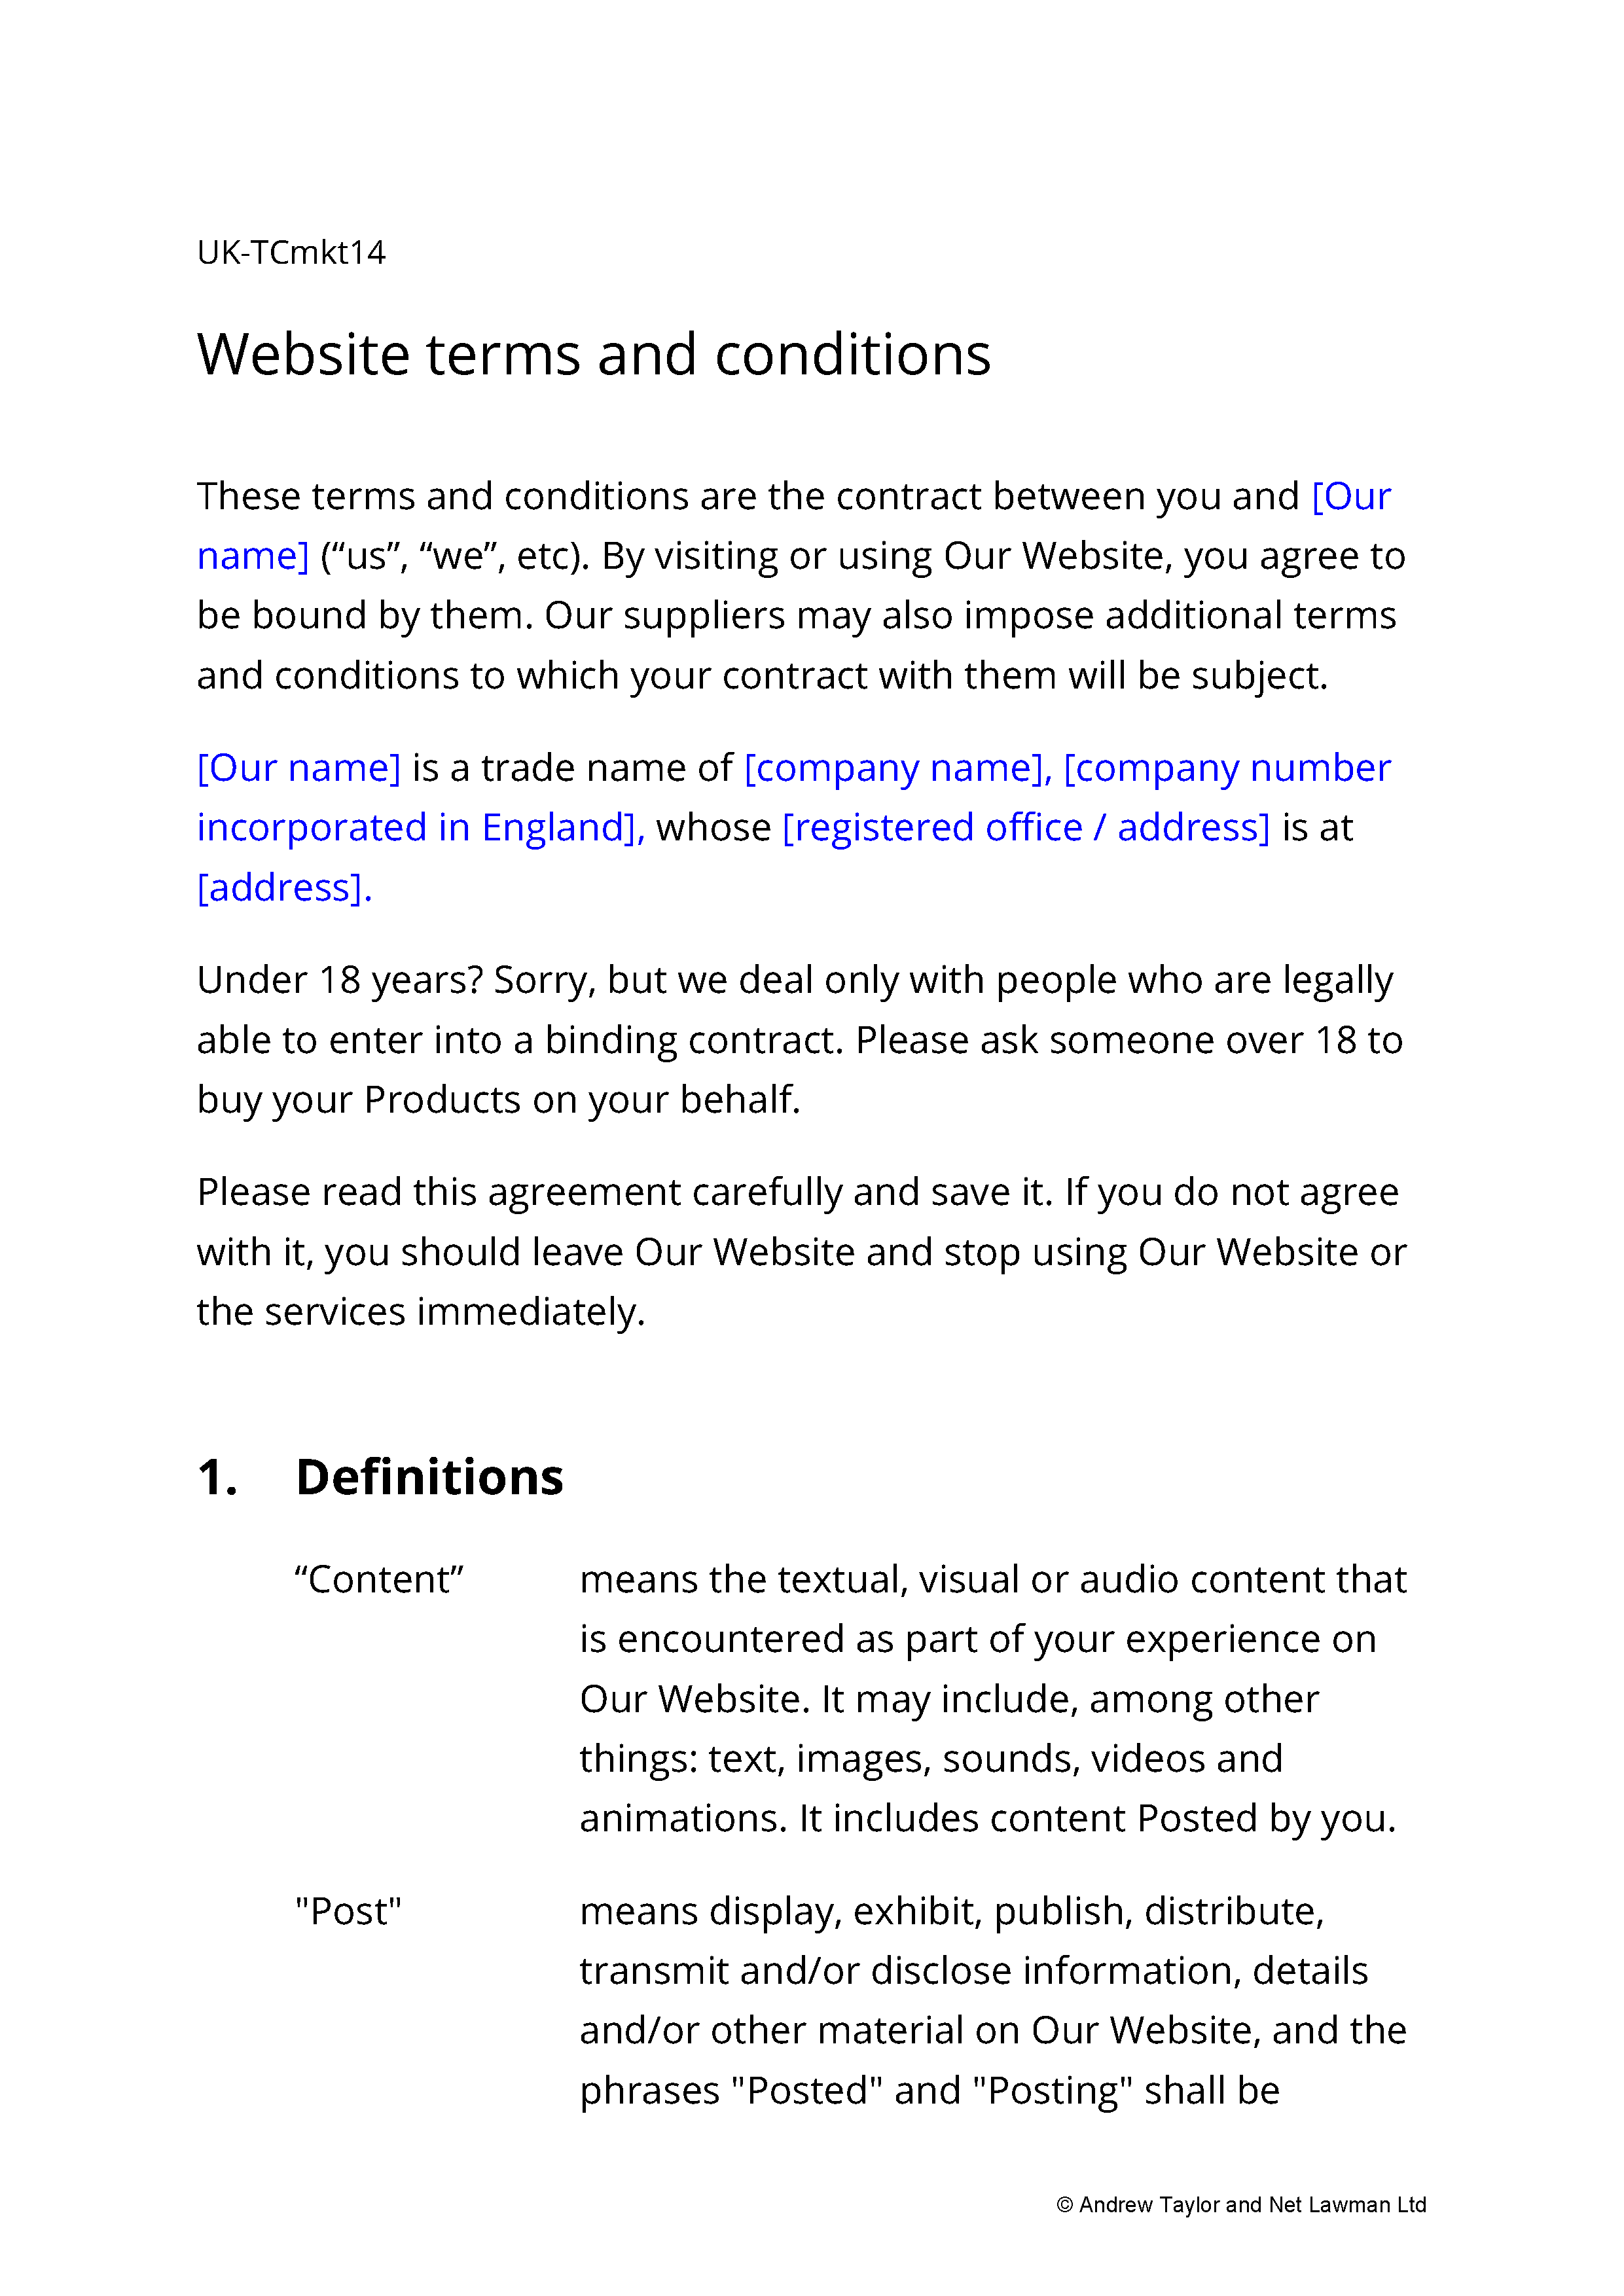 Sample page from the website terms for a marketplace for services